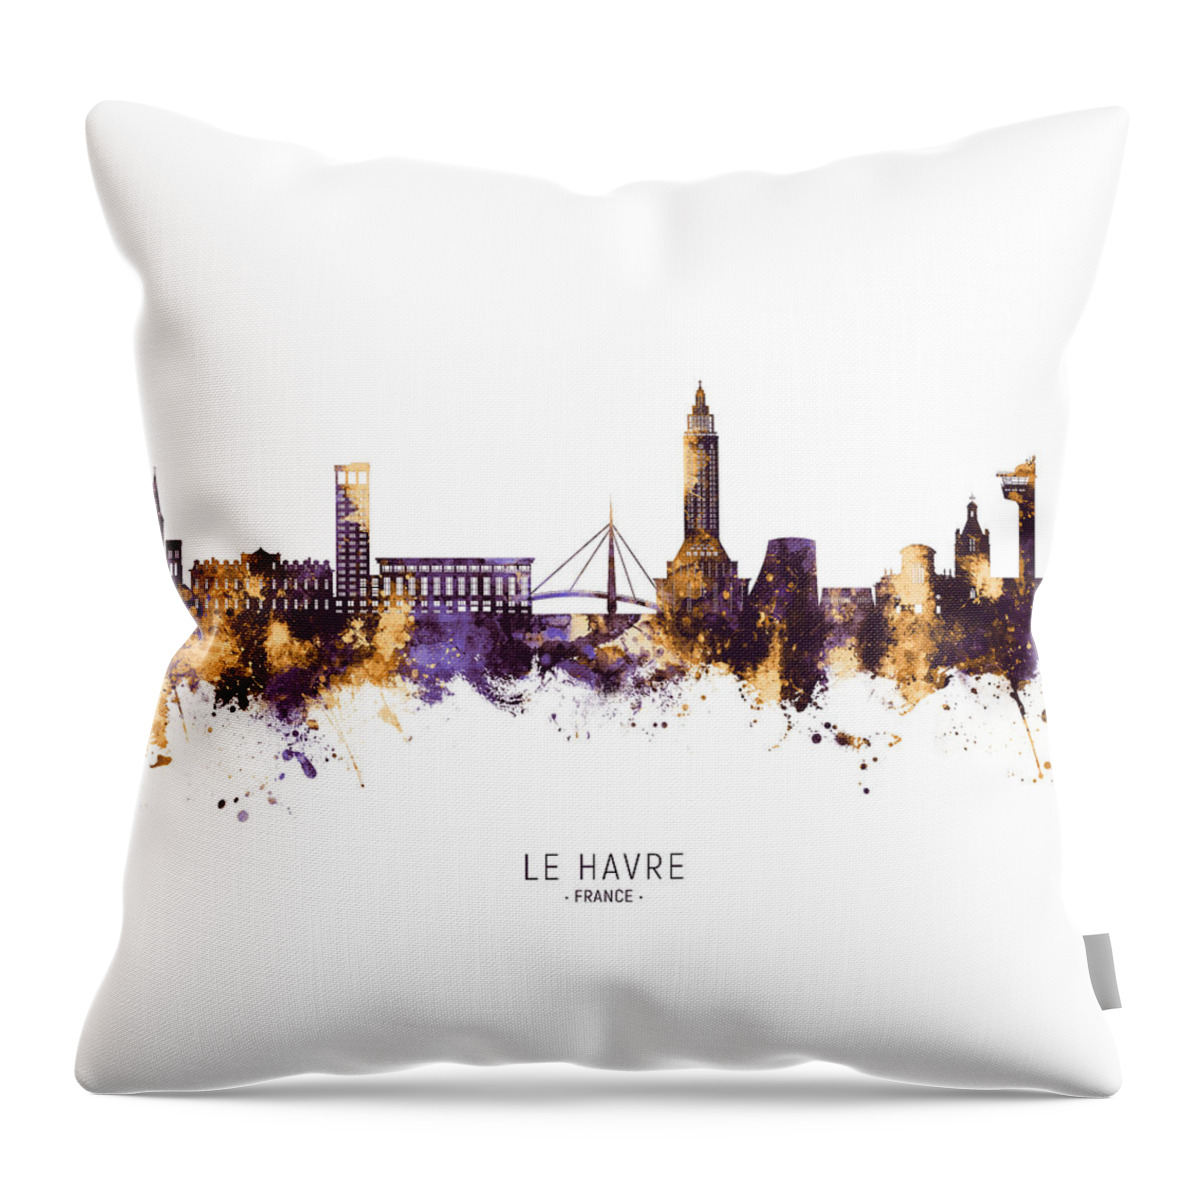 Le Havre Throw Pillow featuring the digital art Le Havre France Skyline #27 by Michael Tompsett